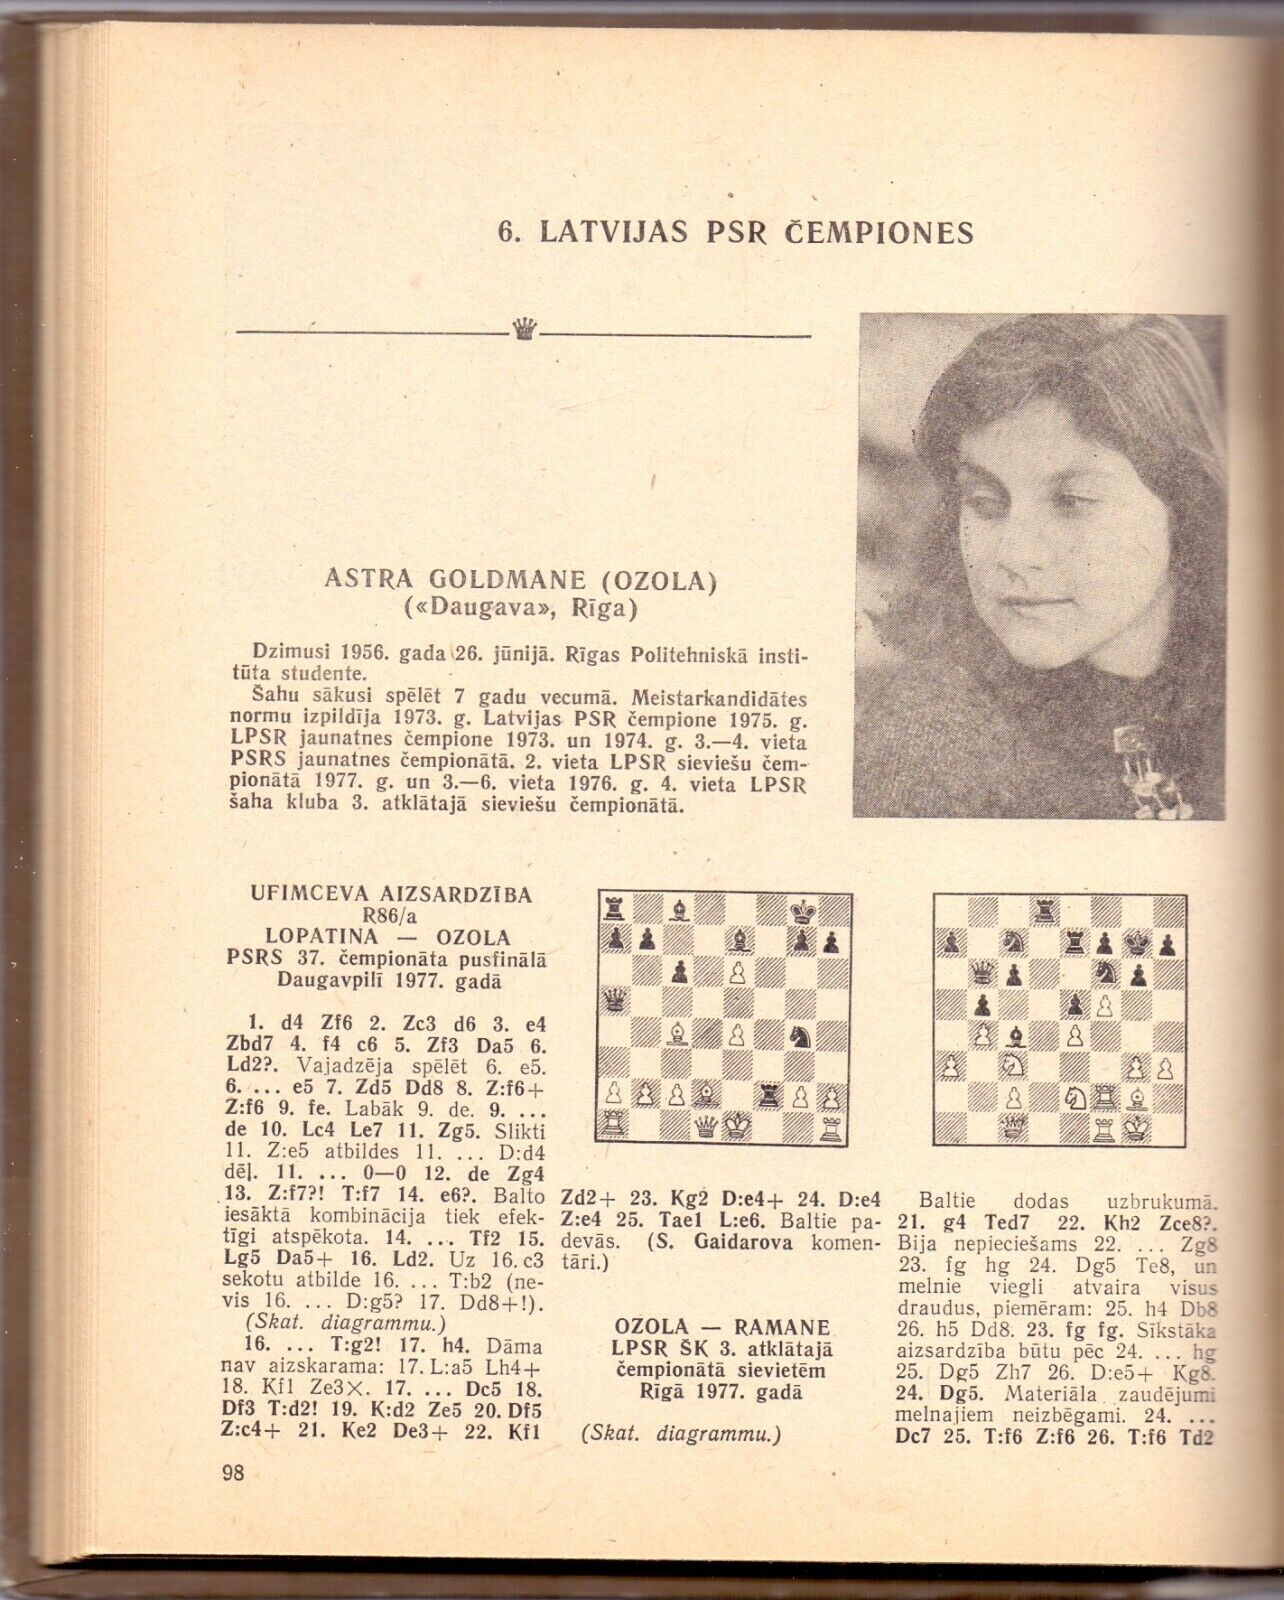 10690.2 Latvian chess books by and N. Zuravlev and A. Gipslis 1980 and 1984